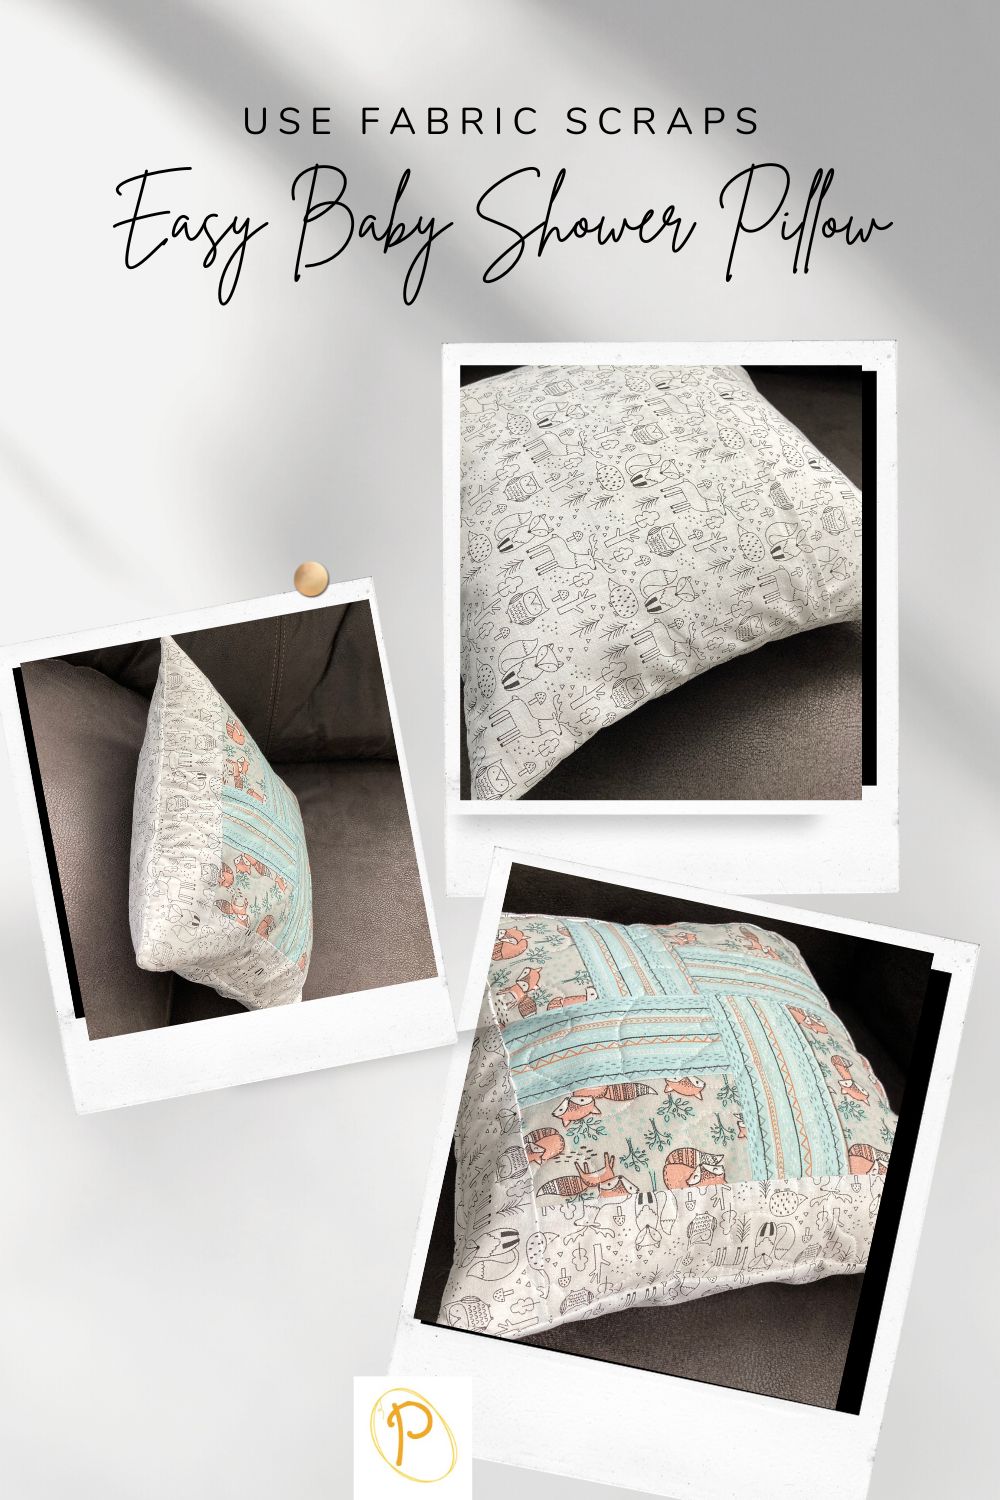 Easy Baby Shower Pillow